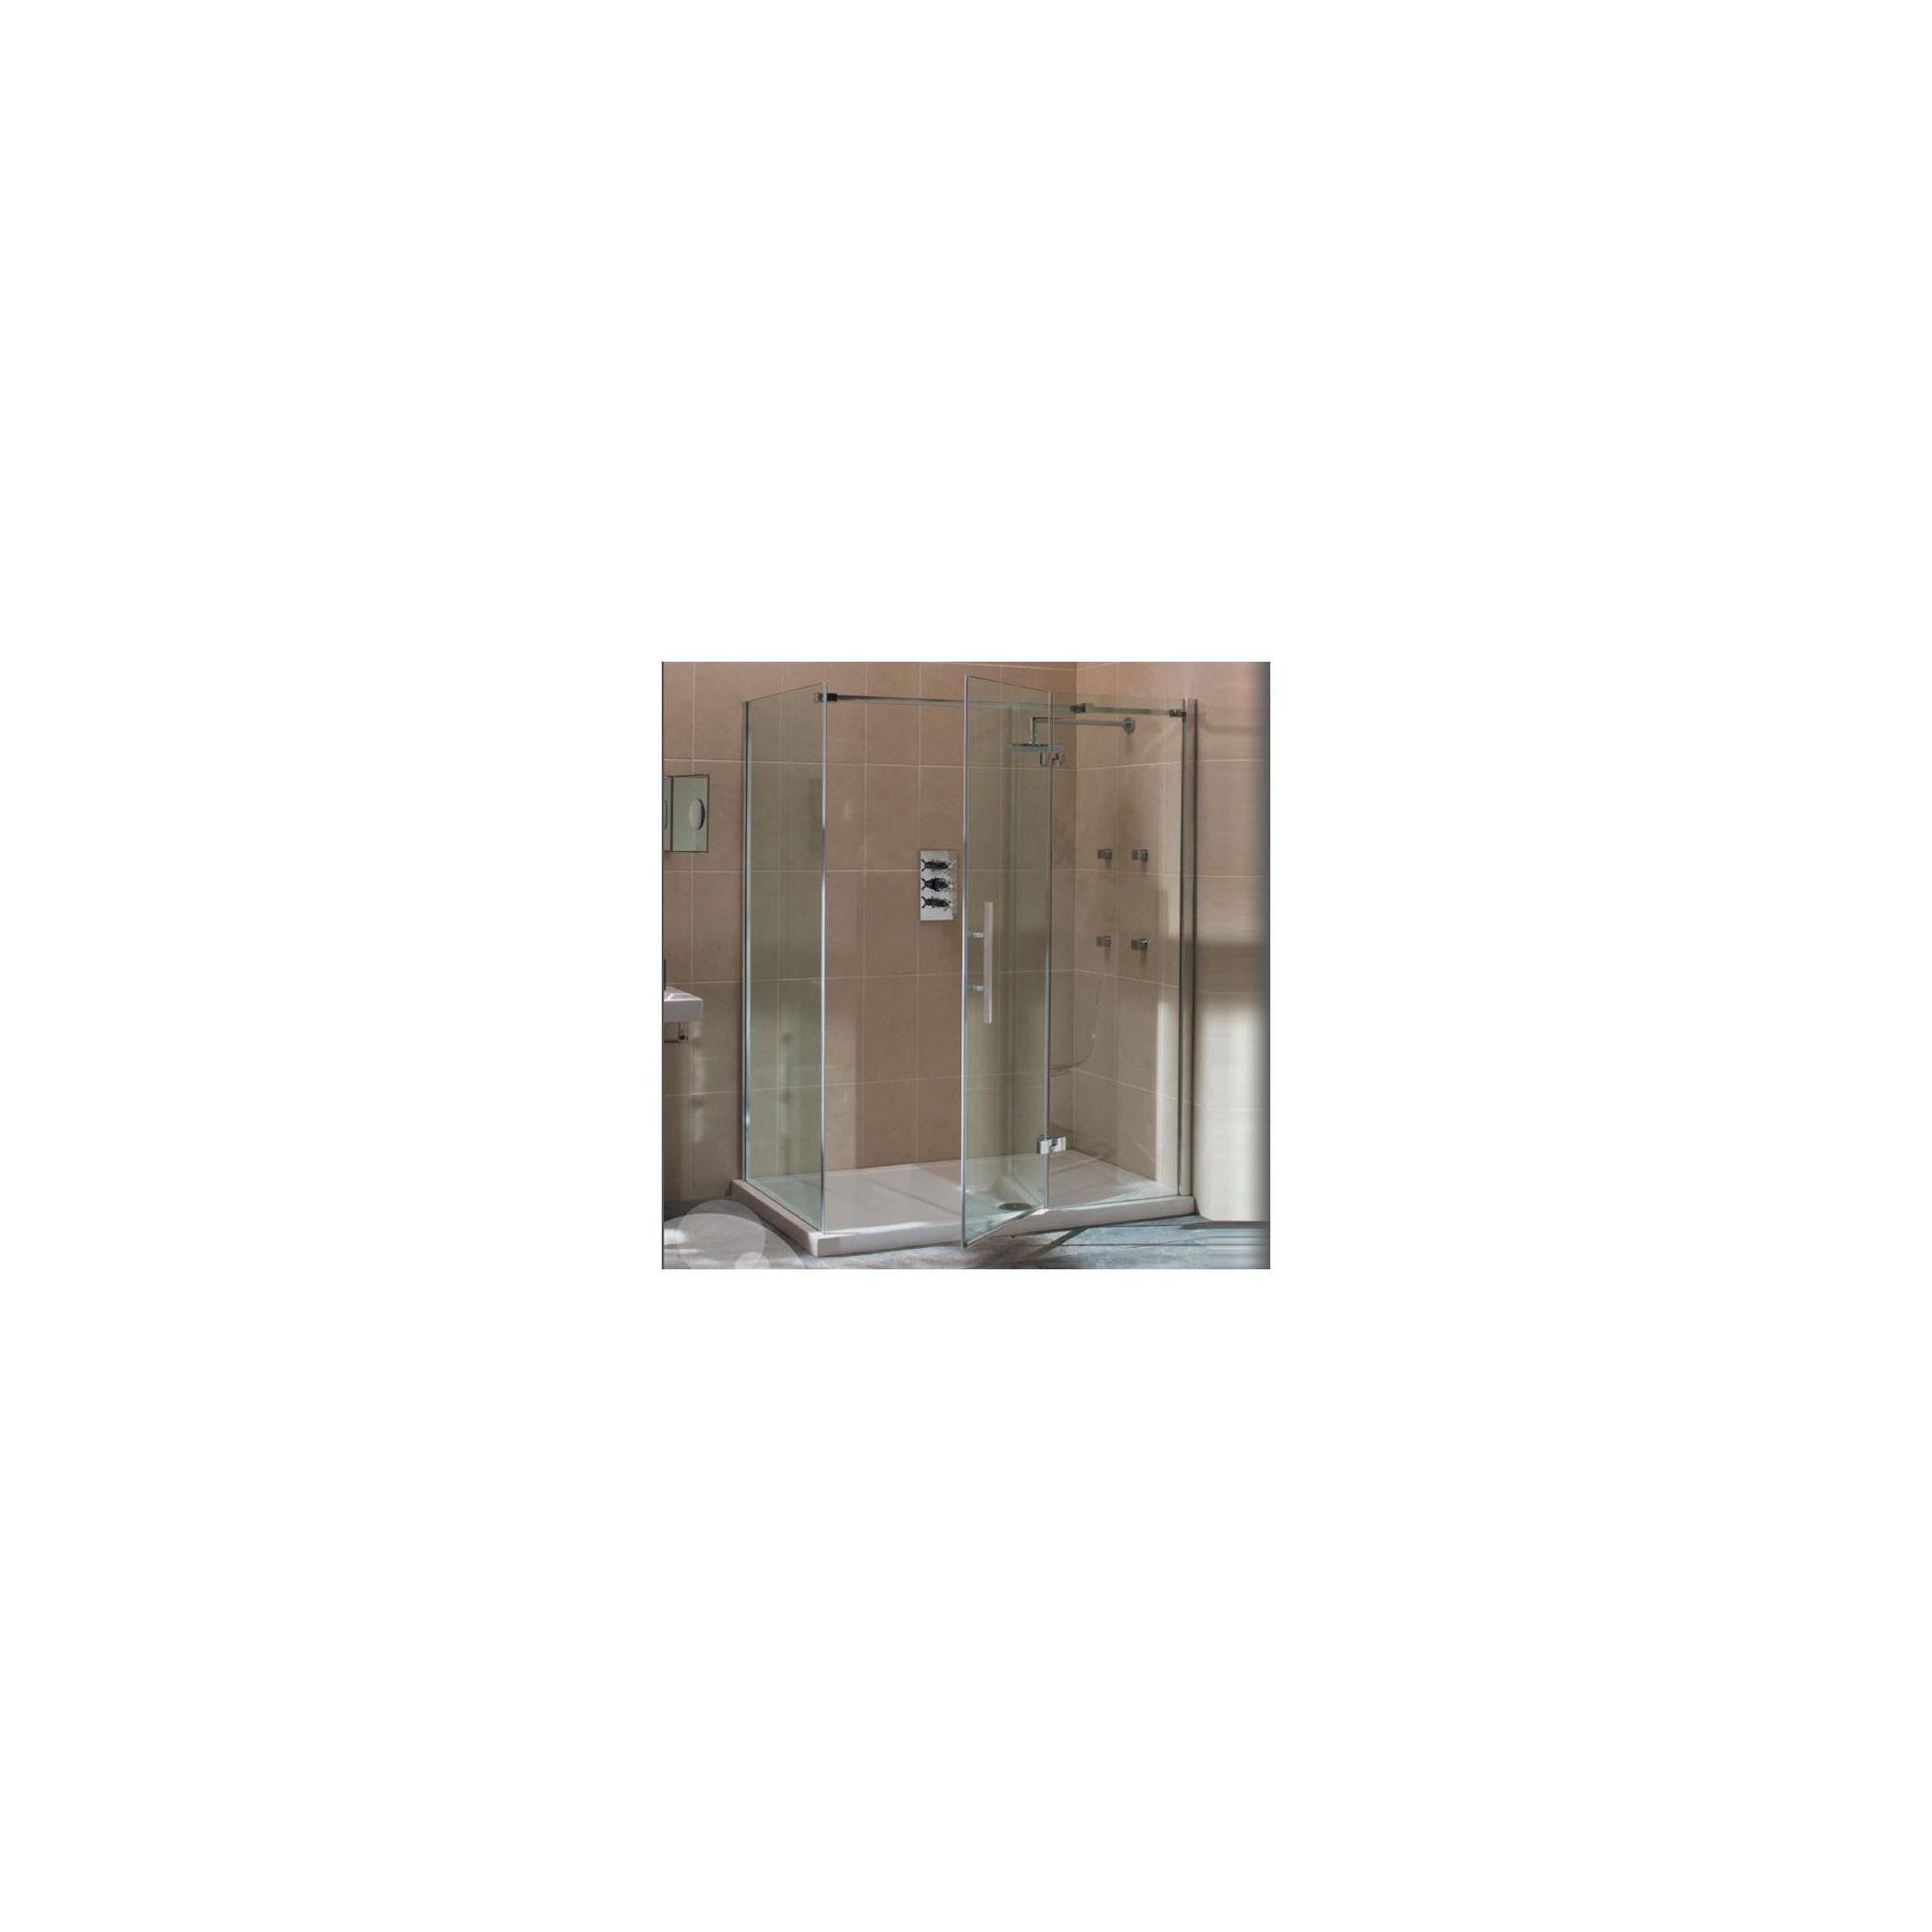 Merlyn Vivid Nine Hinged Door Shower Enclosure with Inline Panel, 1200mm x 900mm, Right Handed, Low Profile Tray, 8mm Glass at Tesco Direct